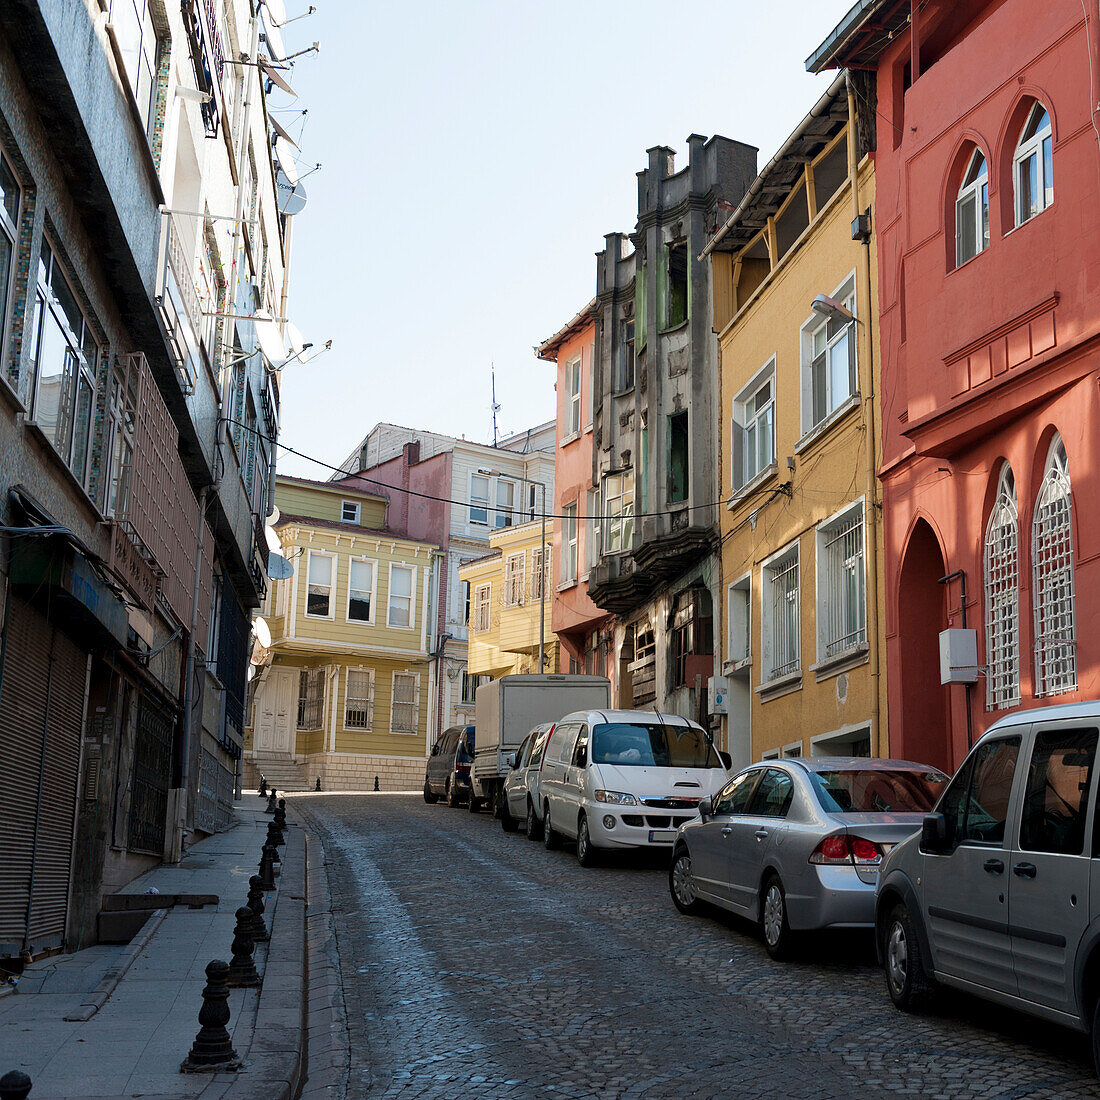 Colourful Buildings And Parked Cars Along A Street; Istanbul Turkey